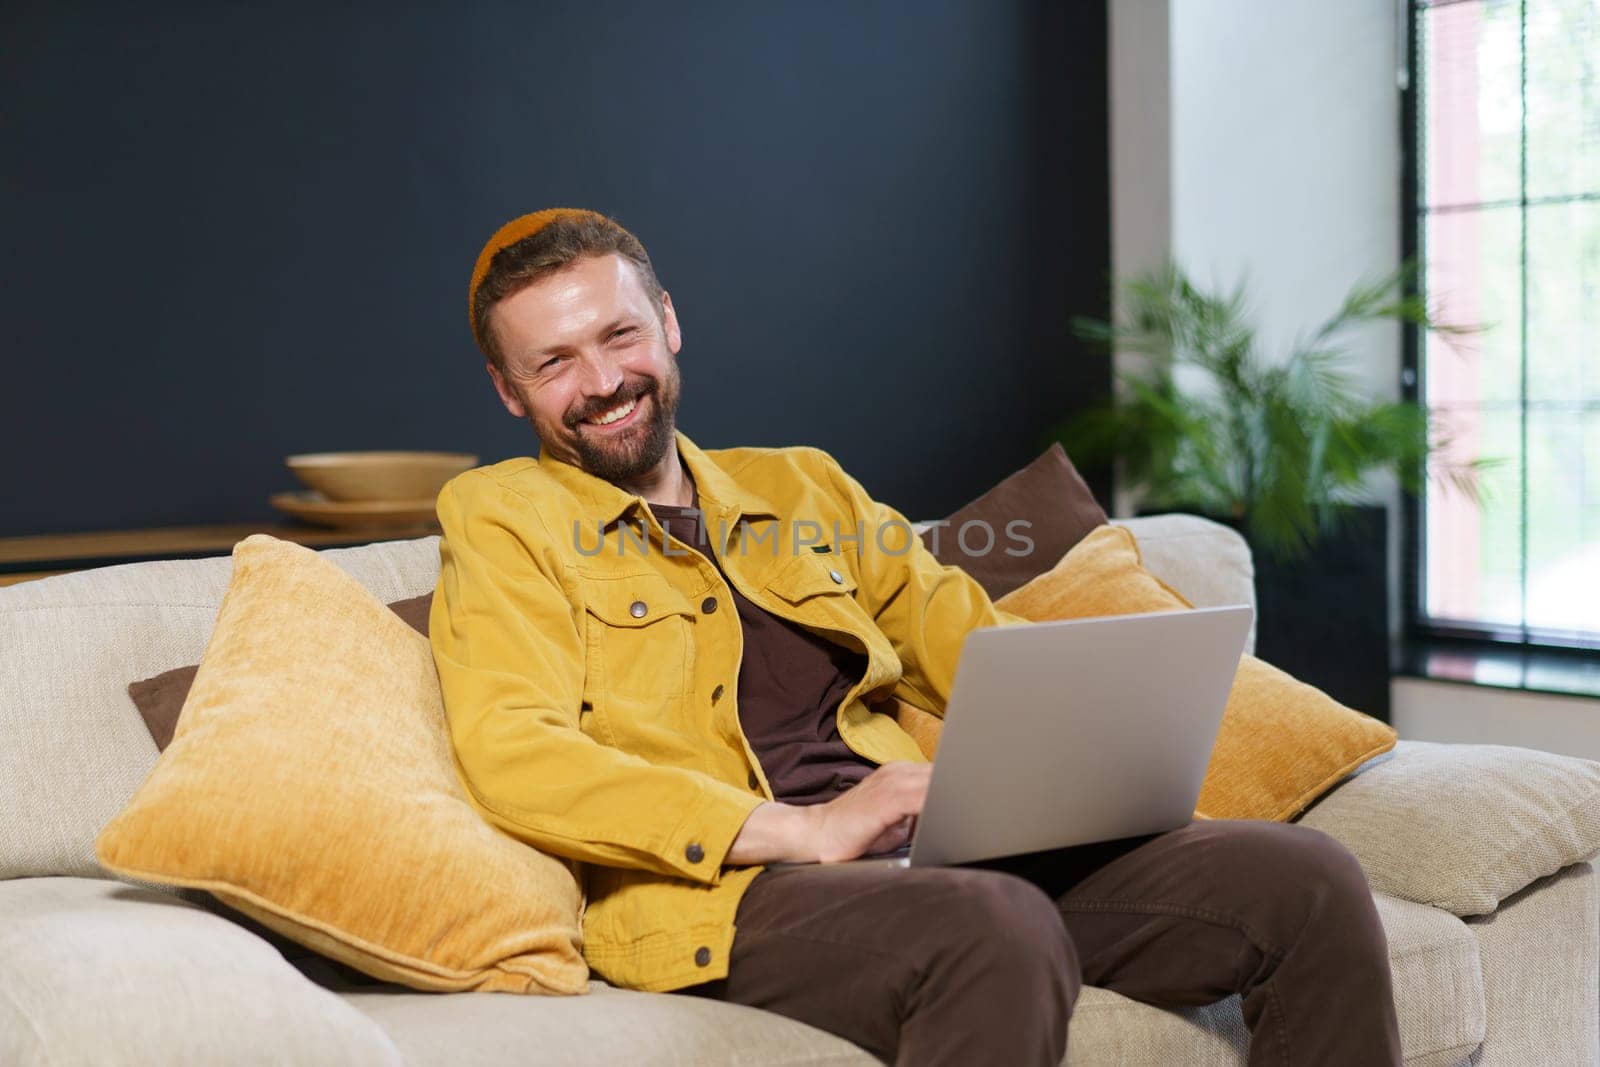 Happy and productive work-from-home scenario. Young man is seen sitting comfortably on sofa, smiling contentedly as he works on his laptop. High quality photo